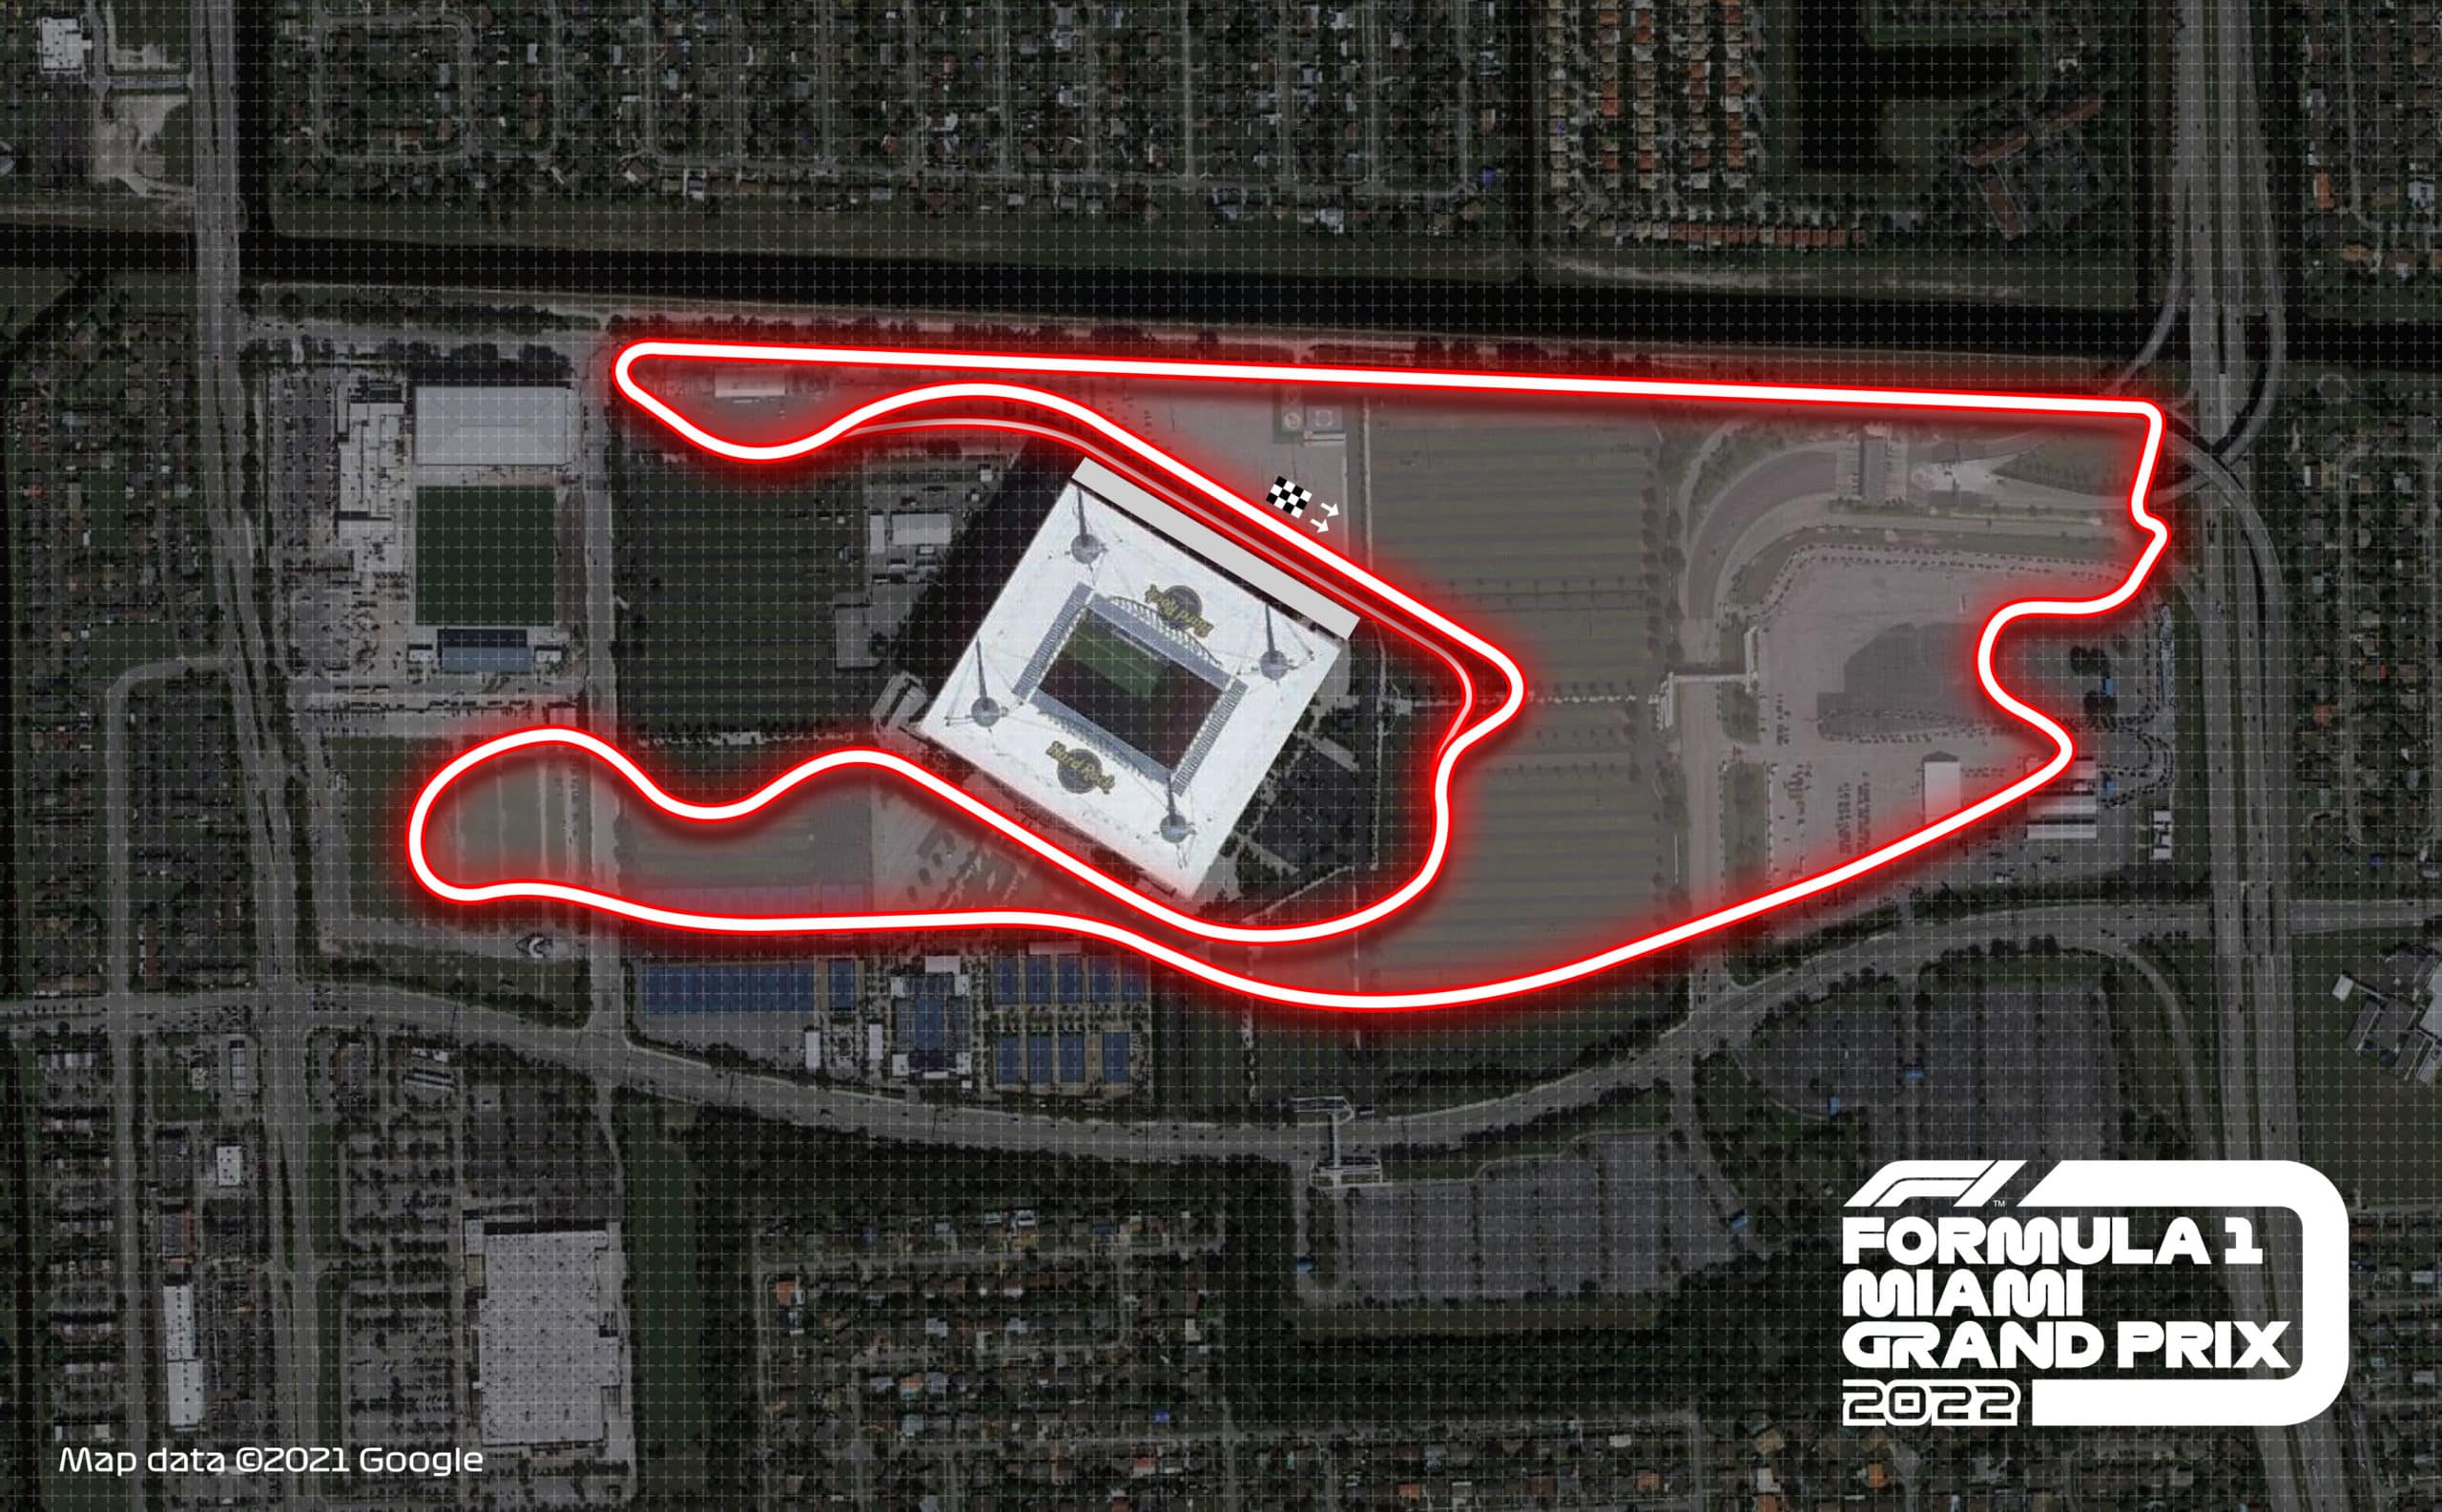 What Can We Expect From The Miami International Autodrome? F1 News